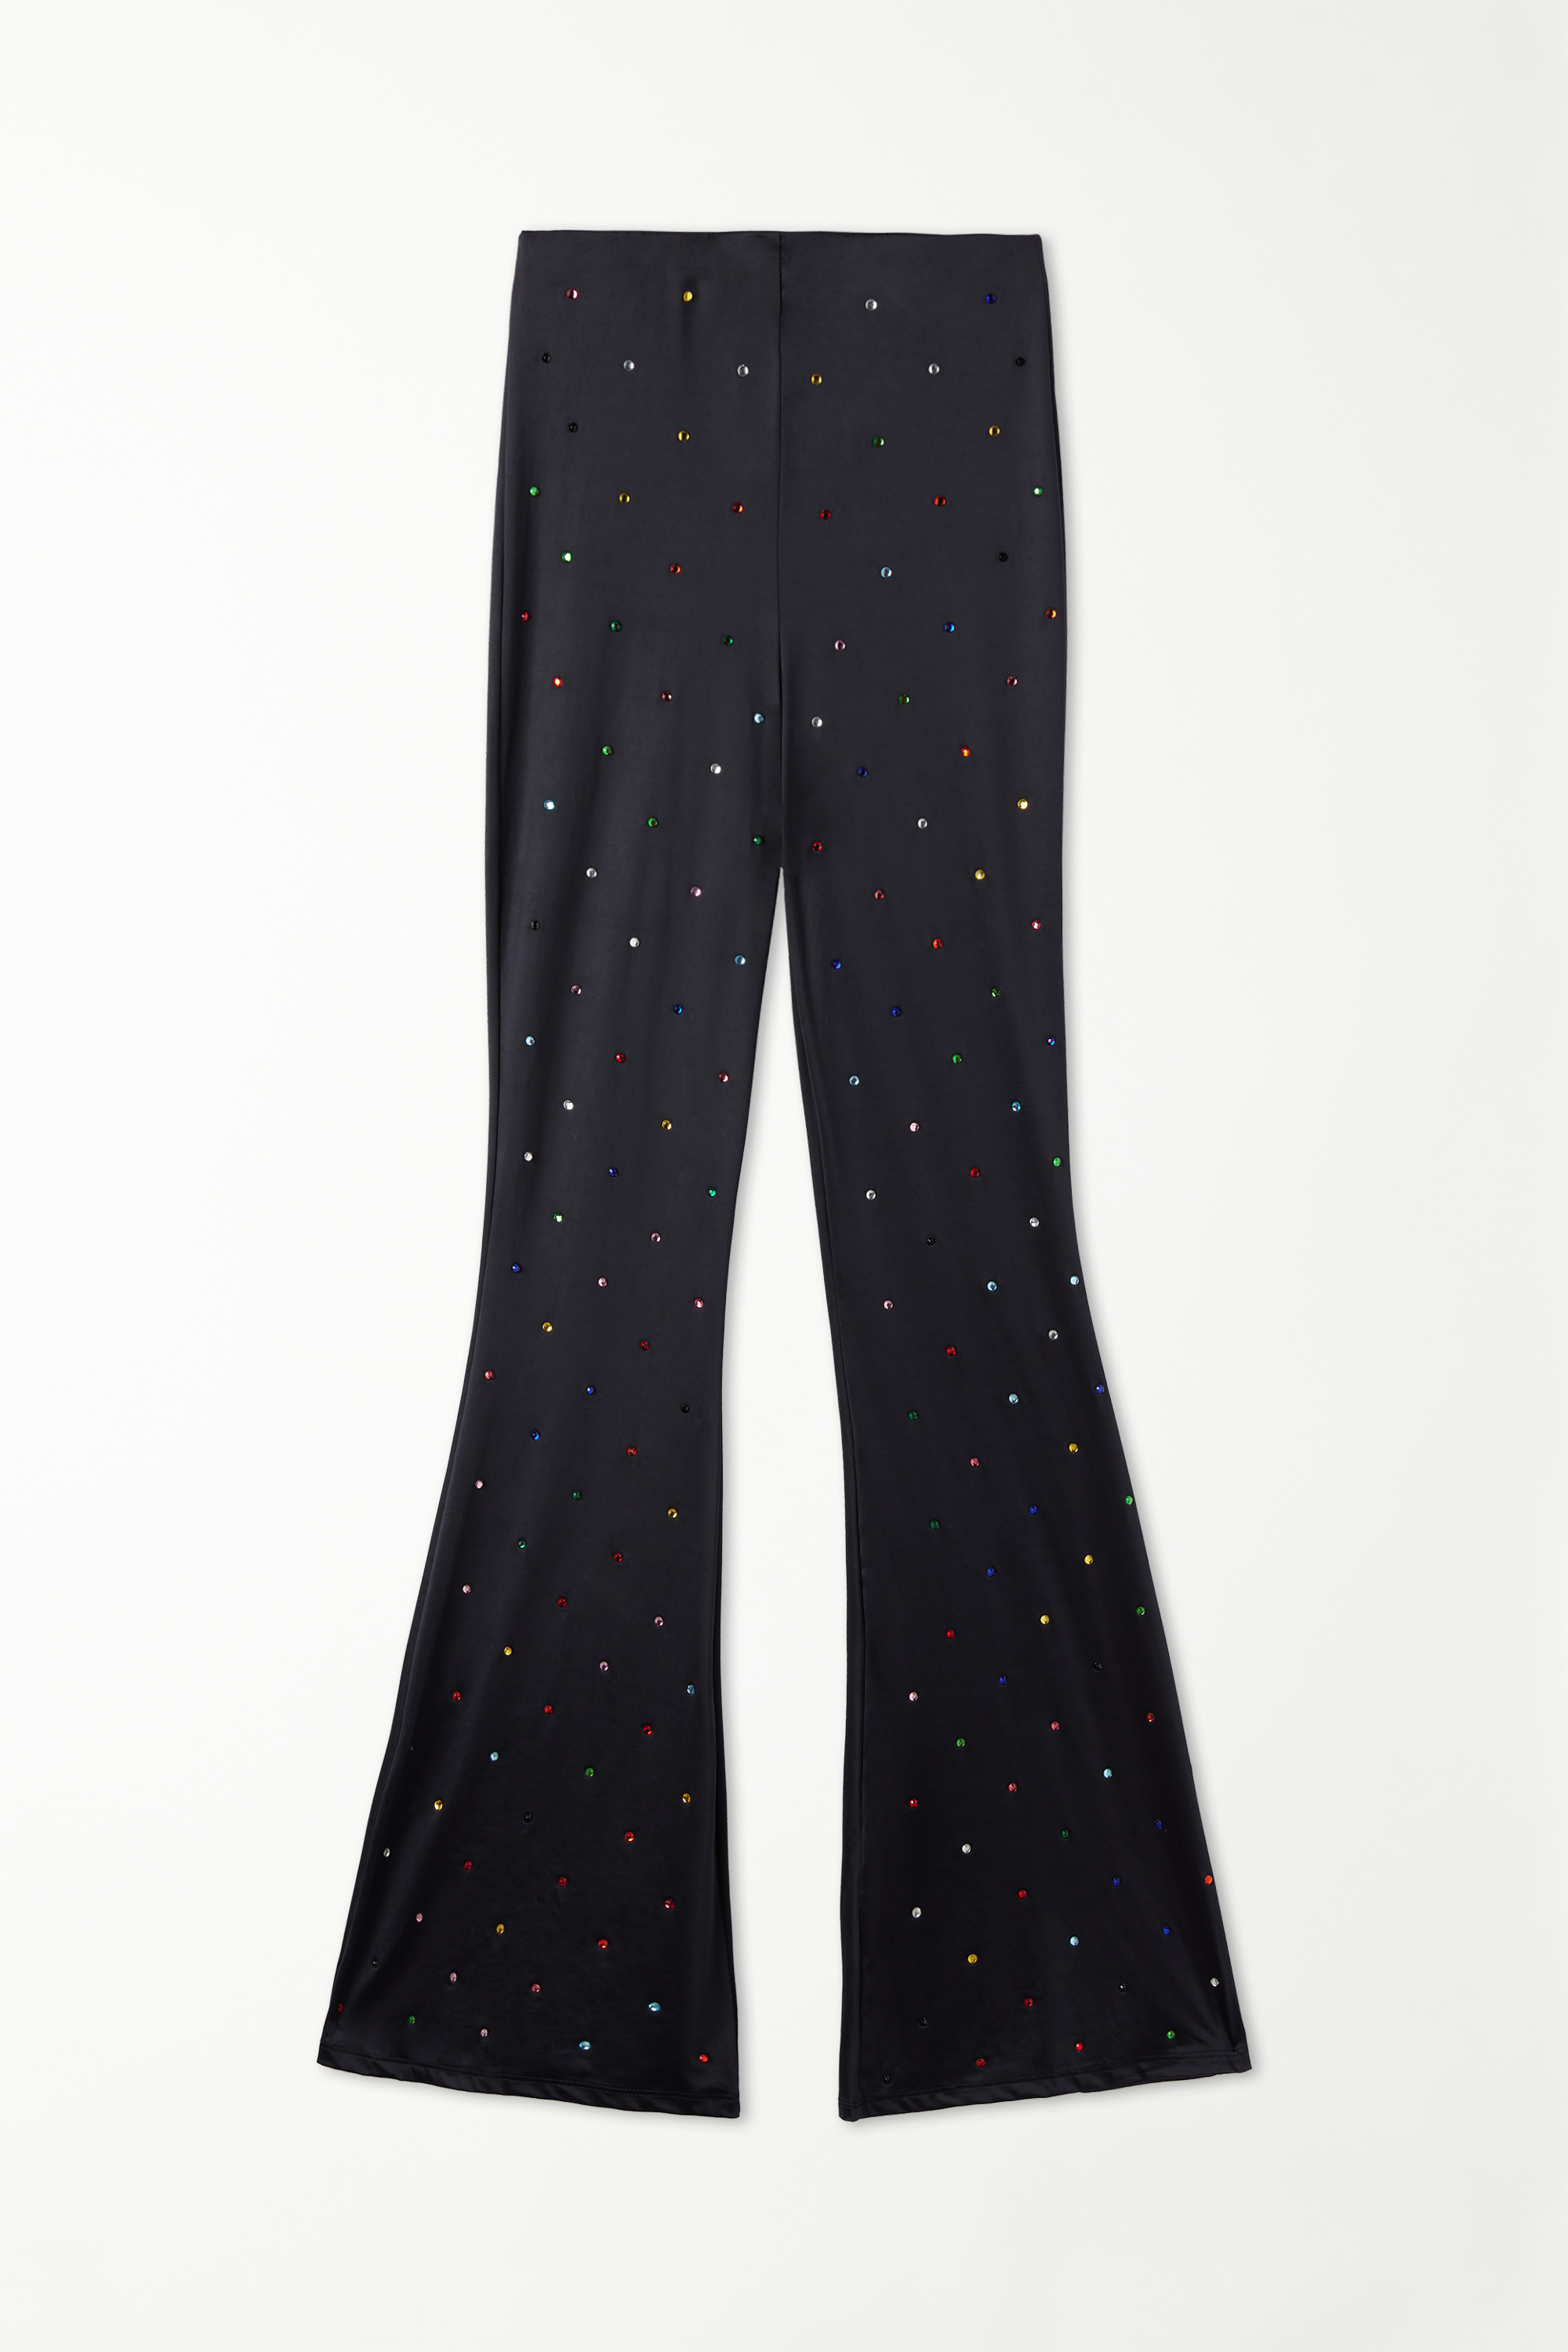 Limited Edition Microfiber Pants with Colored Rhinestones